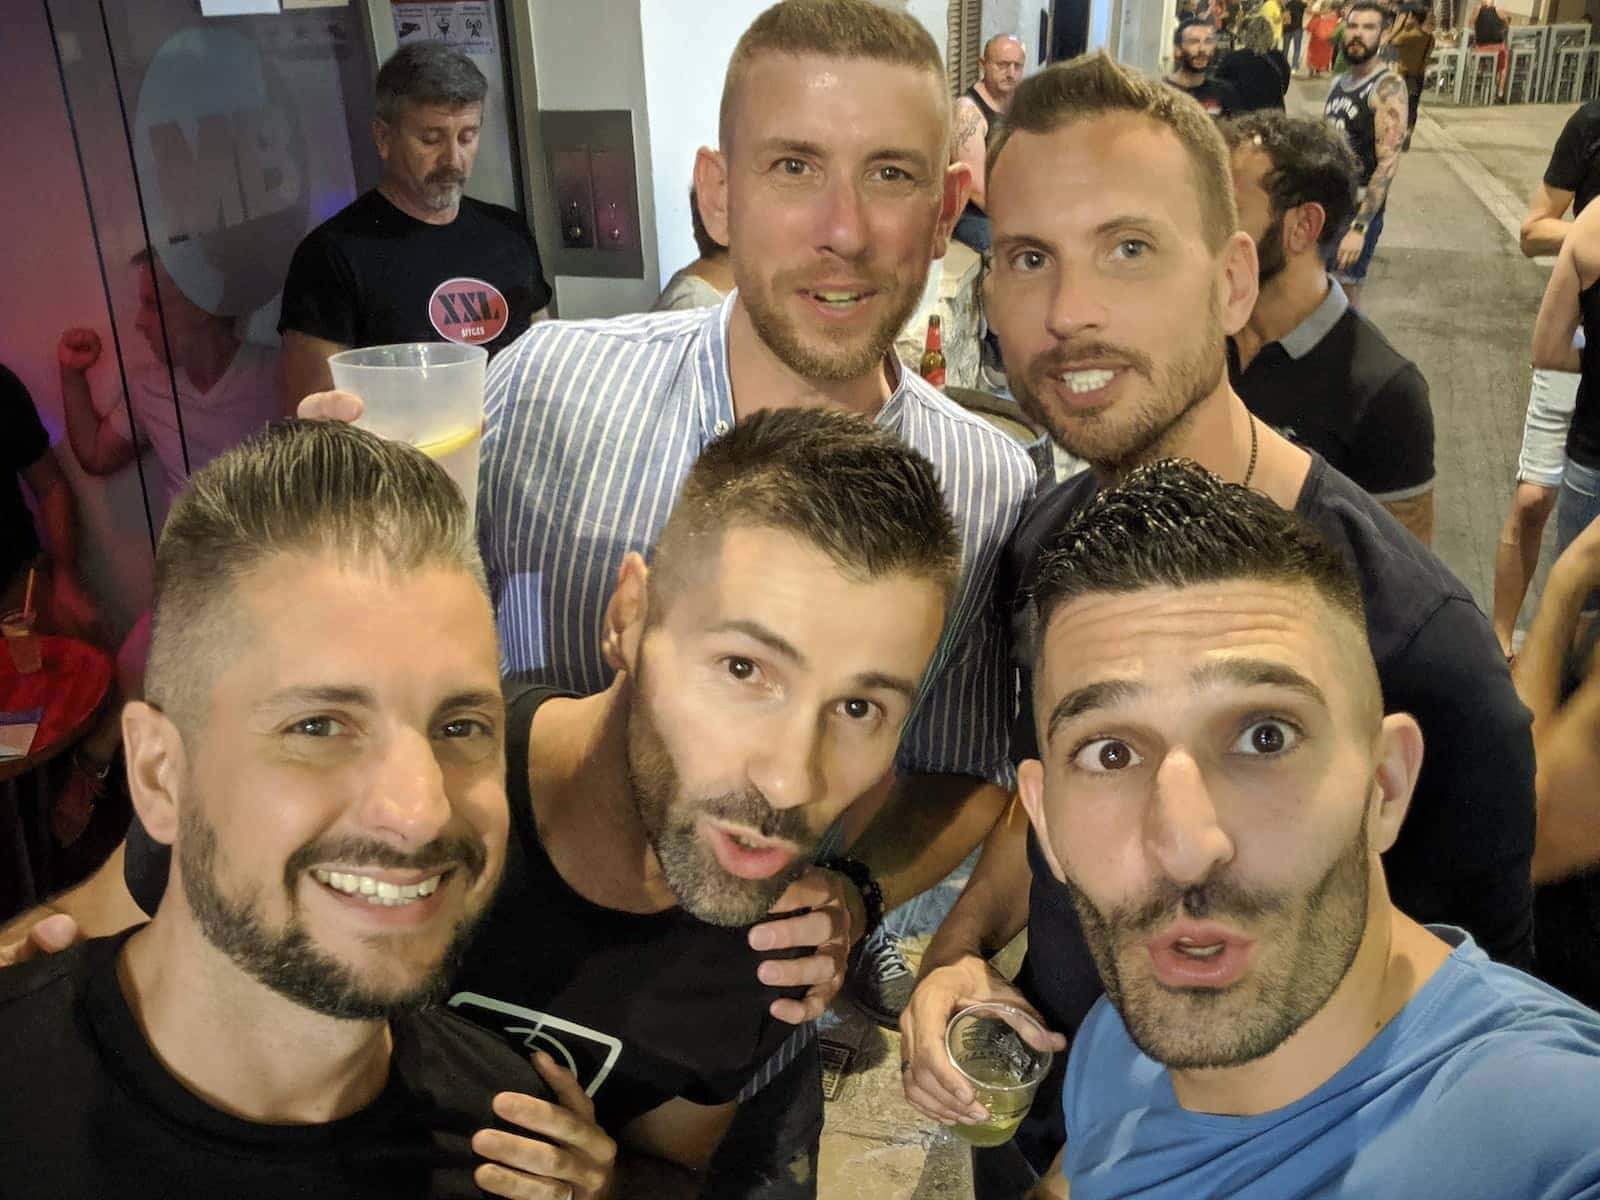 While the gay bars of Sitges are more popular, there are a few fun gay clubs to dance the night away as well